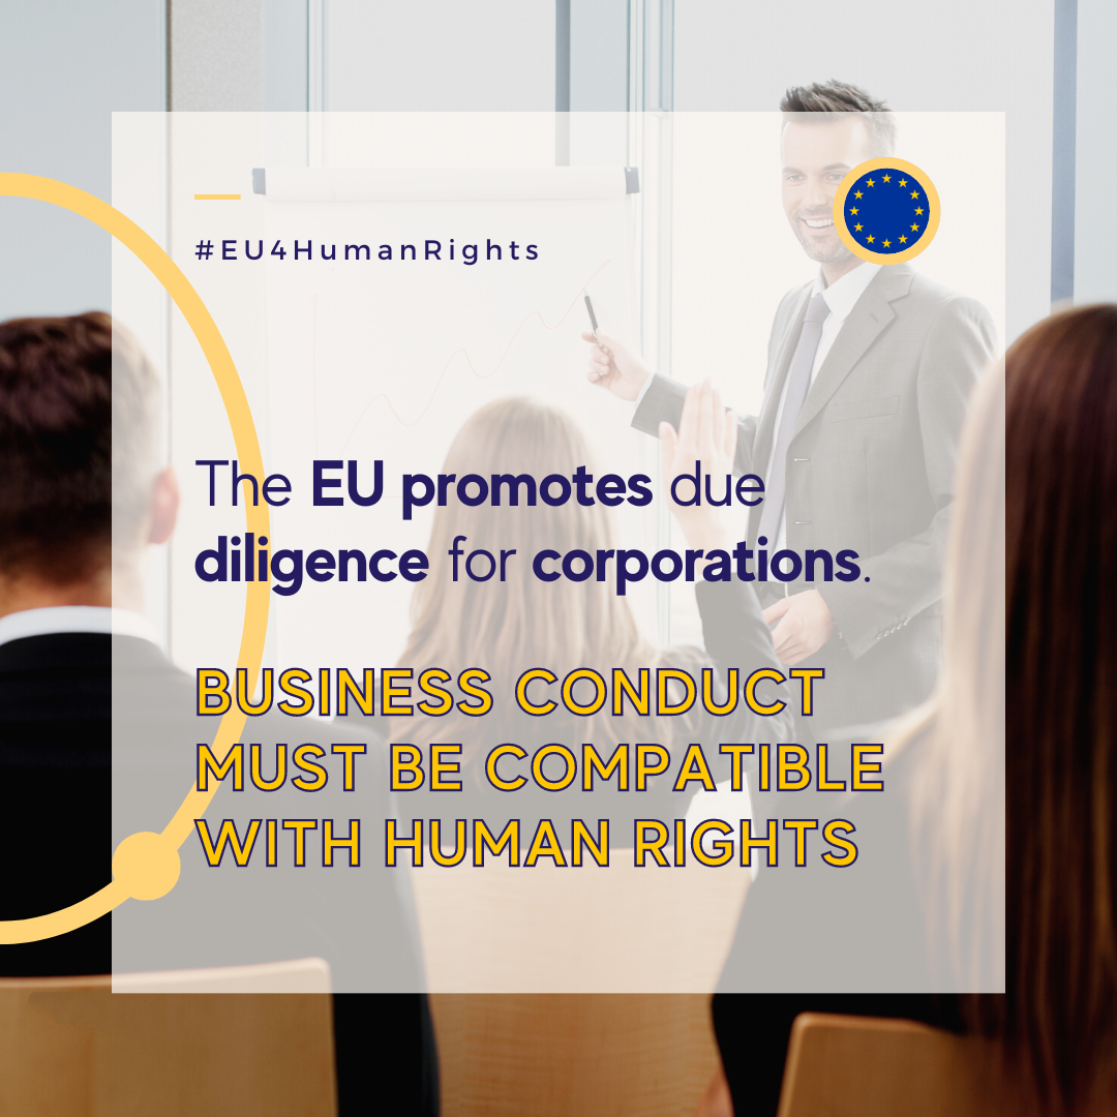 Human Rights carousel - business conduct